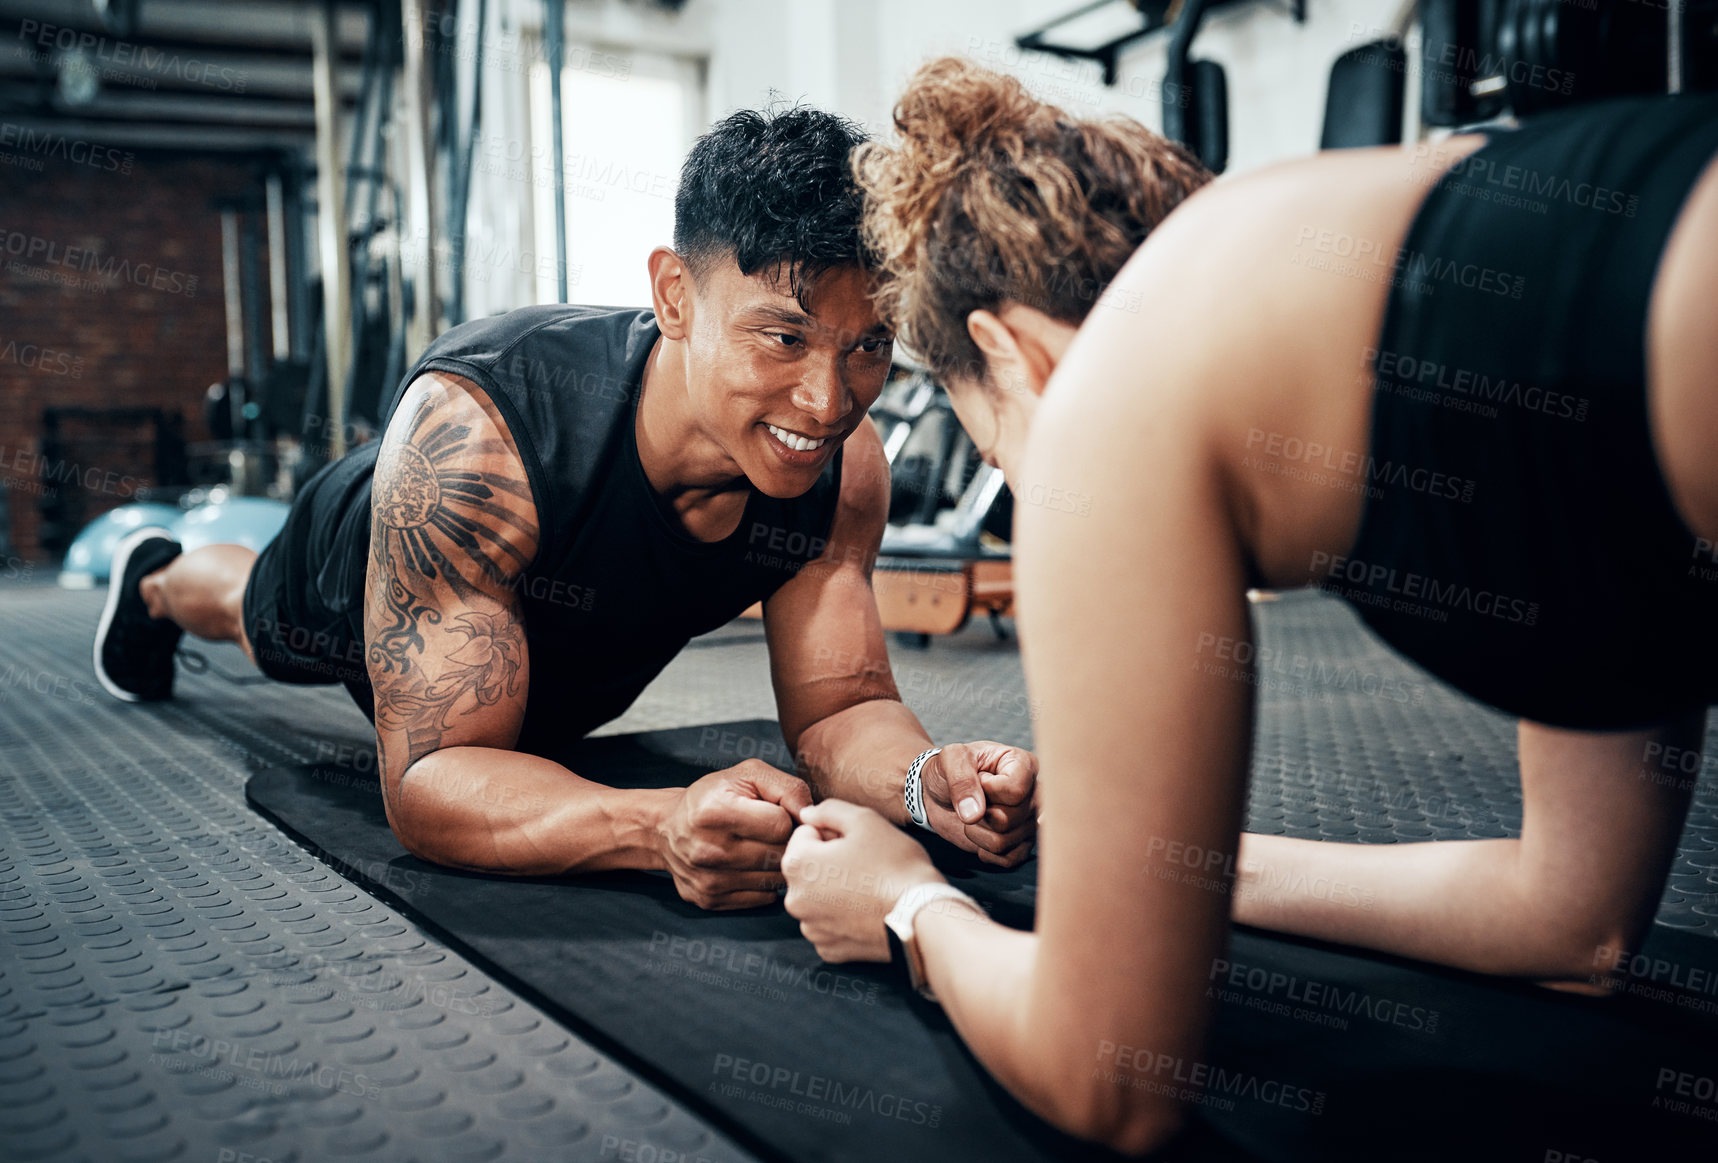 Buy stock photo Shot of two sporty young people working out together at the gym